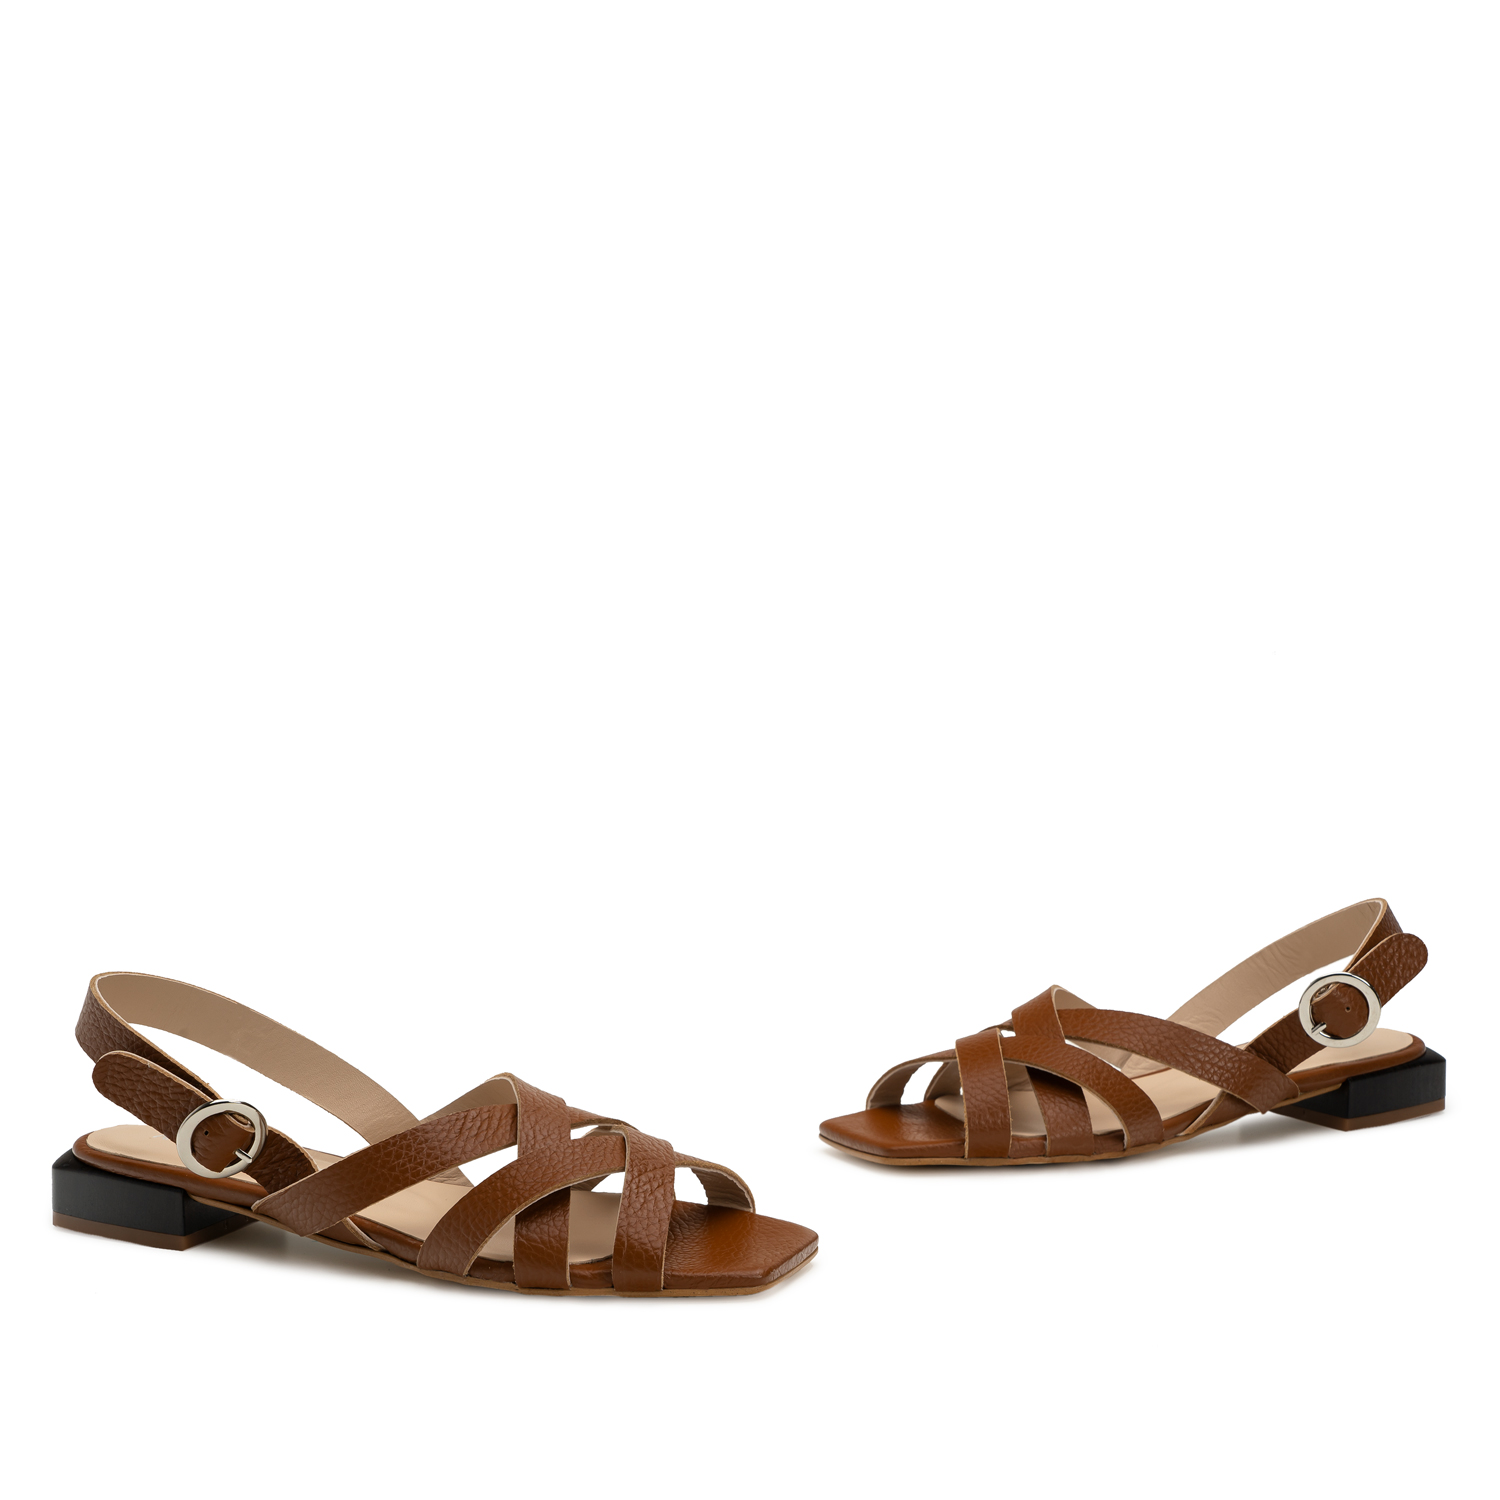 Sandals in Camel Embossed Leather 